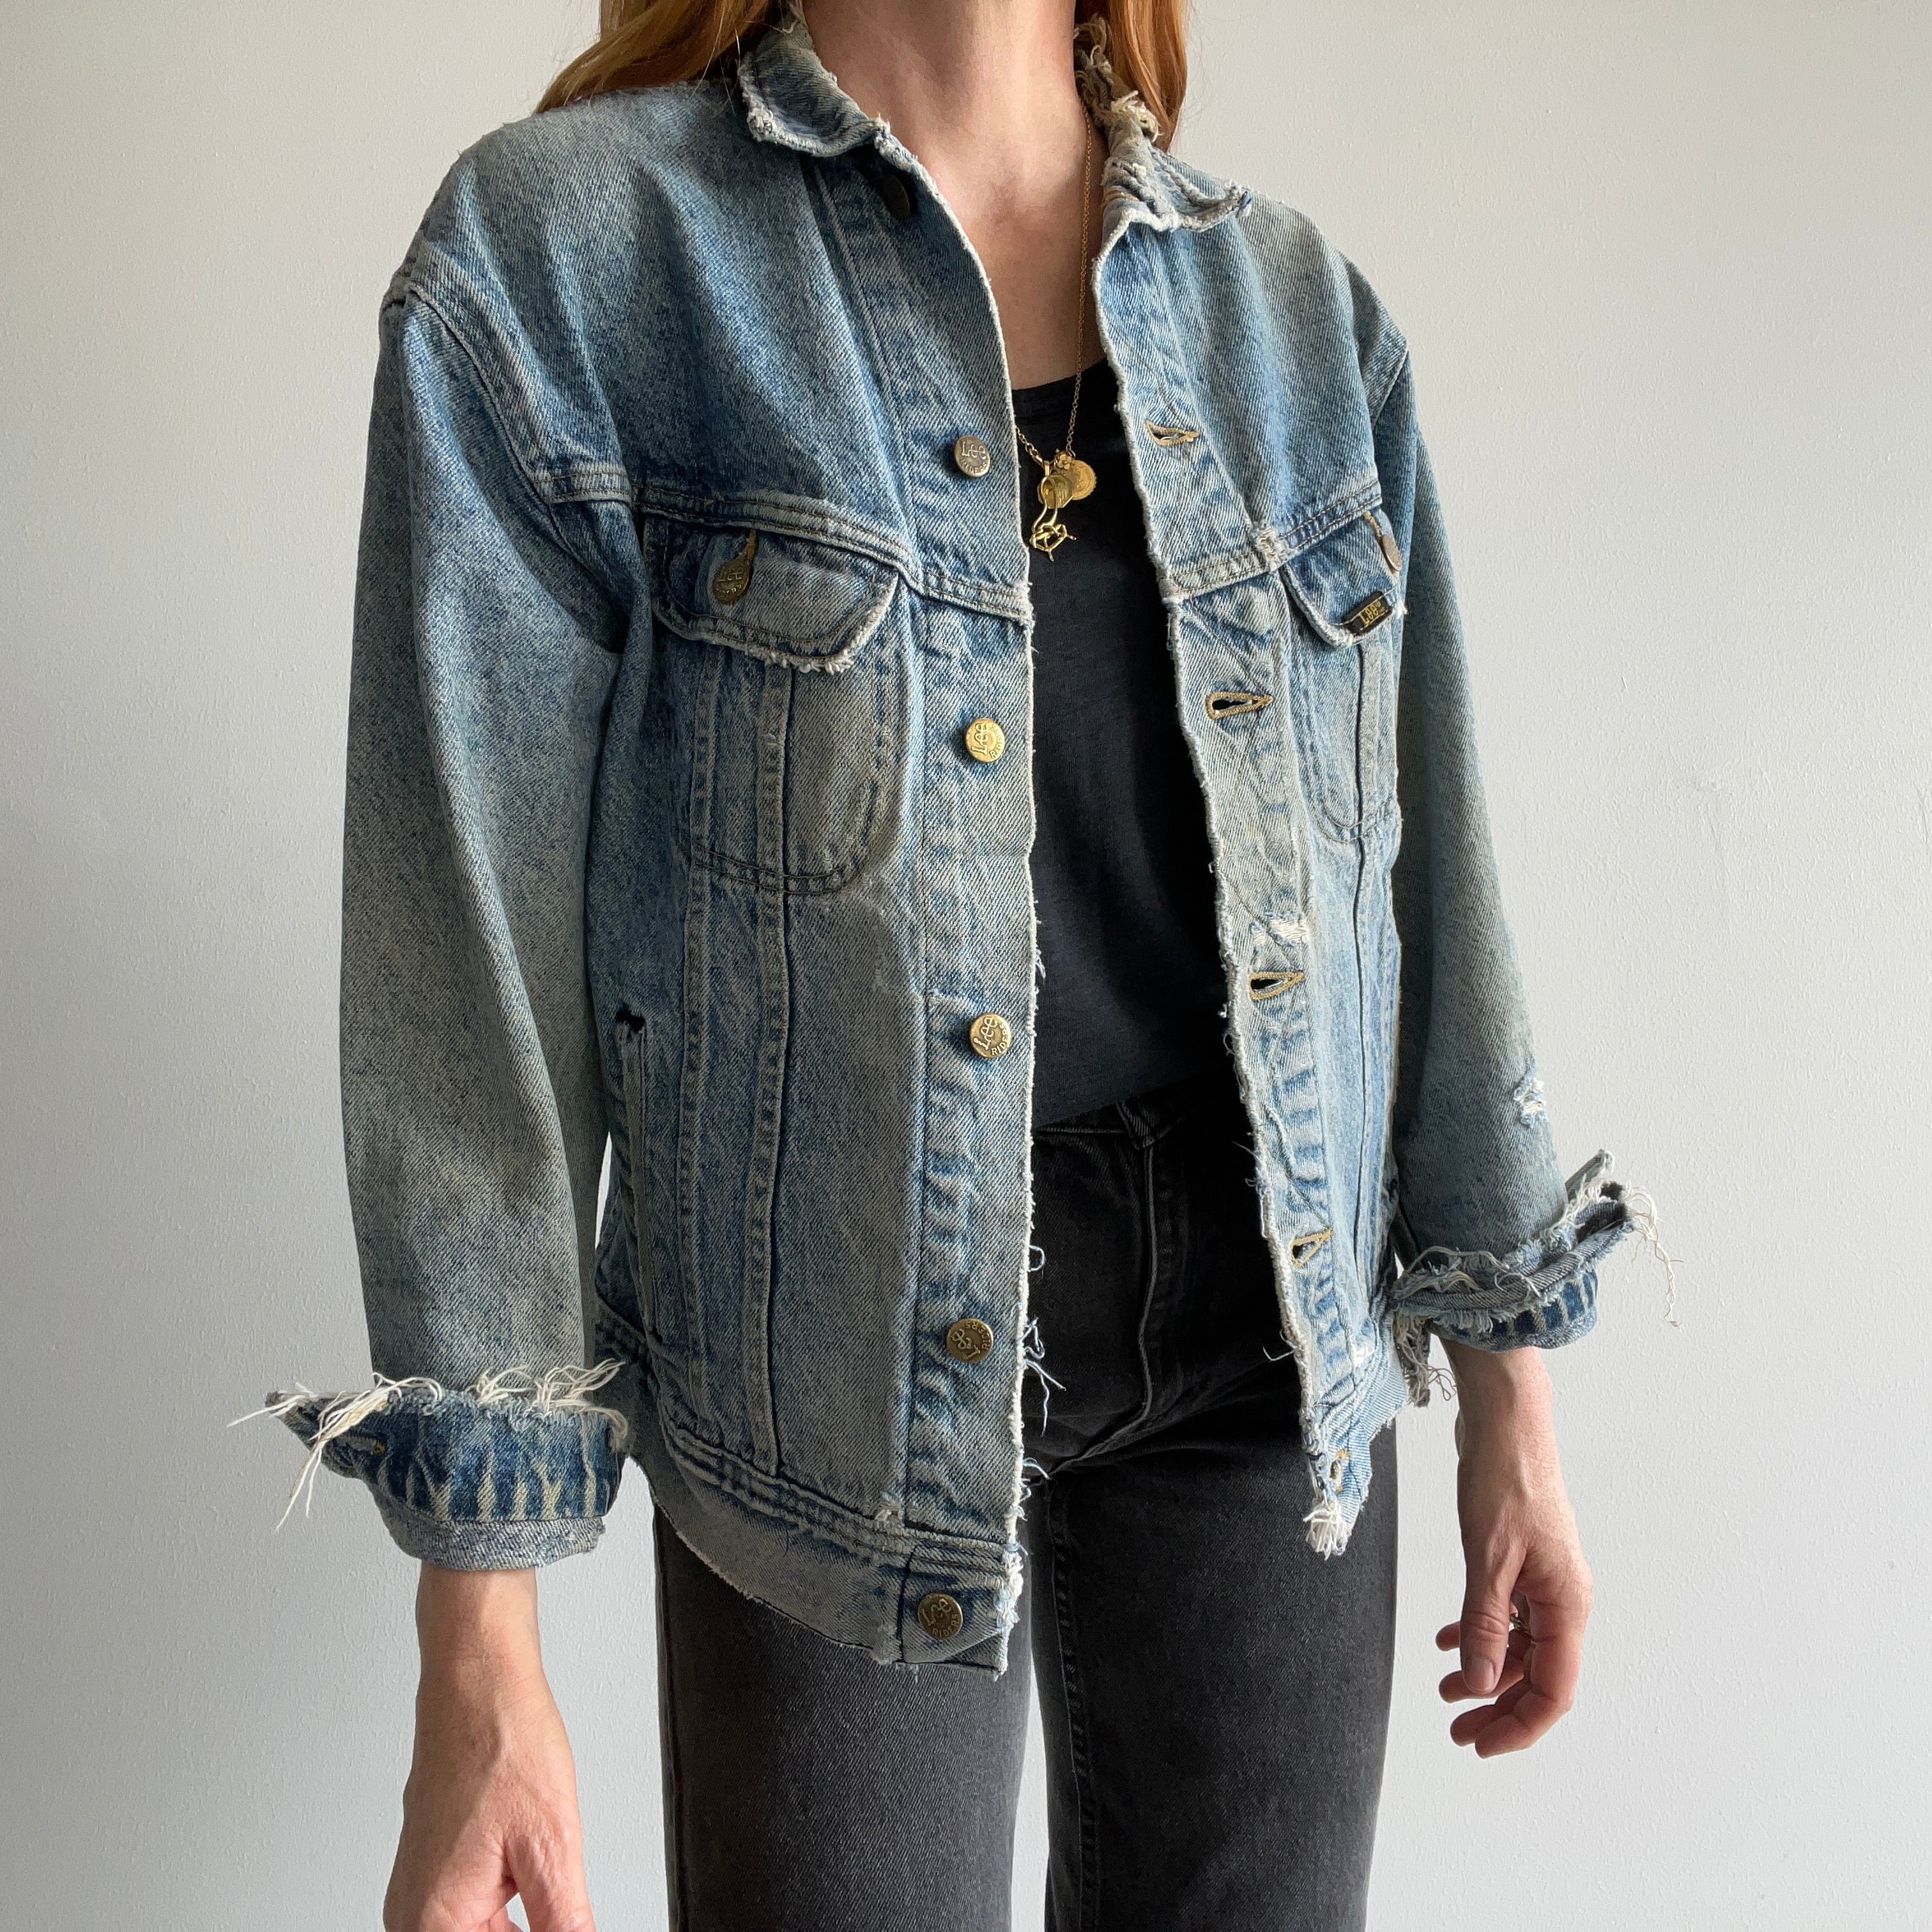 Lee Rider Loose-Fit Denim Jacket | Urban Outfitters